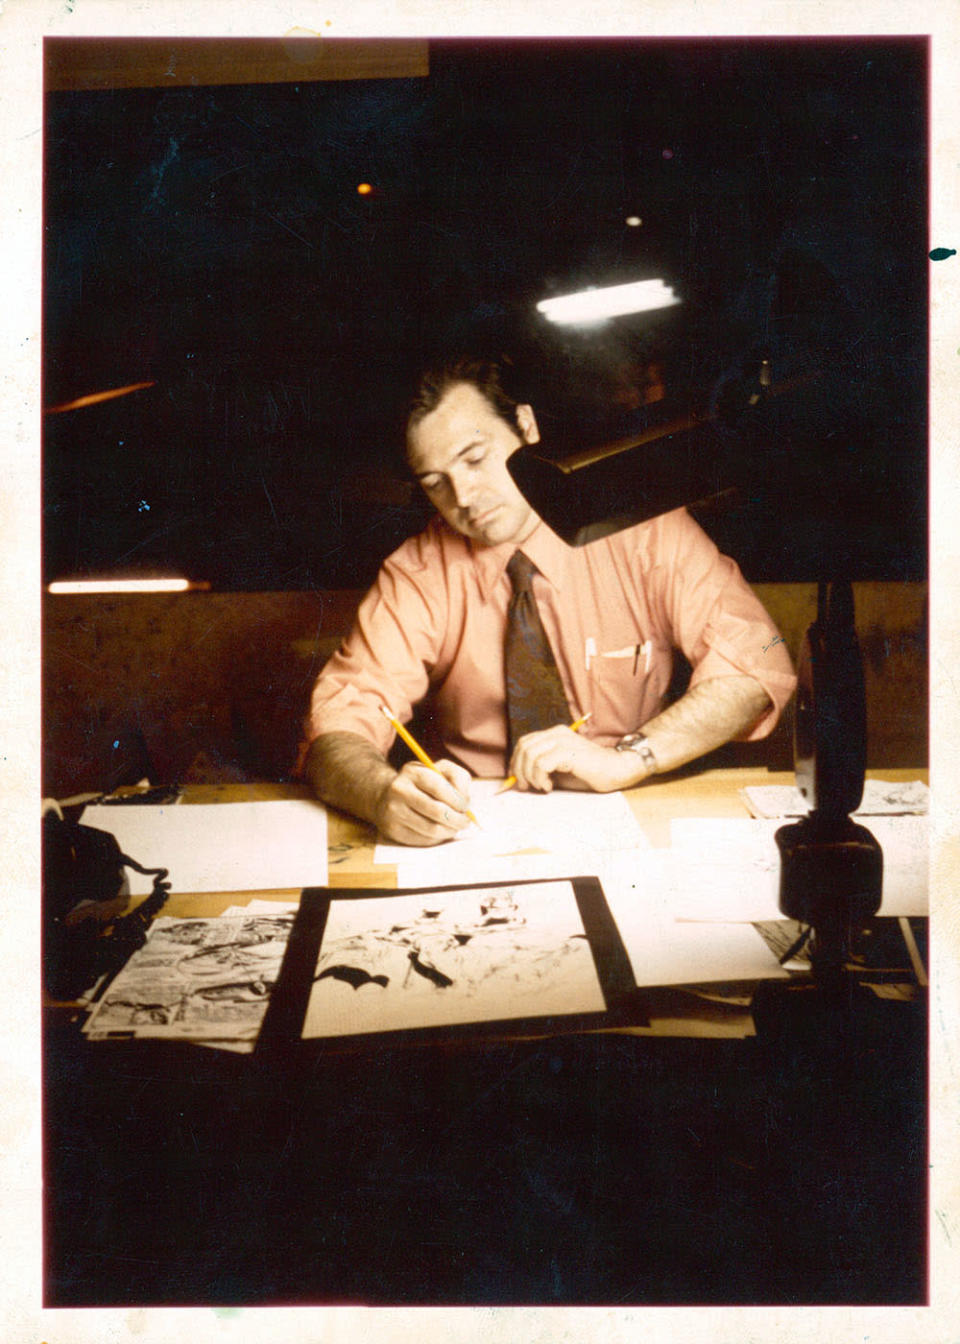 Neal Adams at work in the early 70s - Credit: Courtesy of the Adams Family